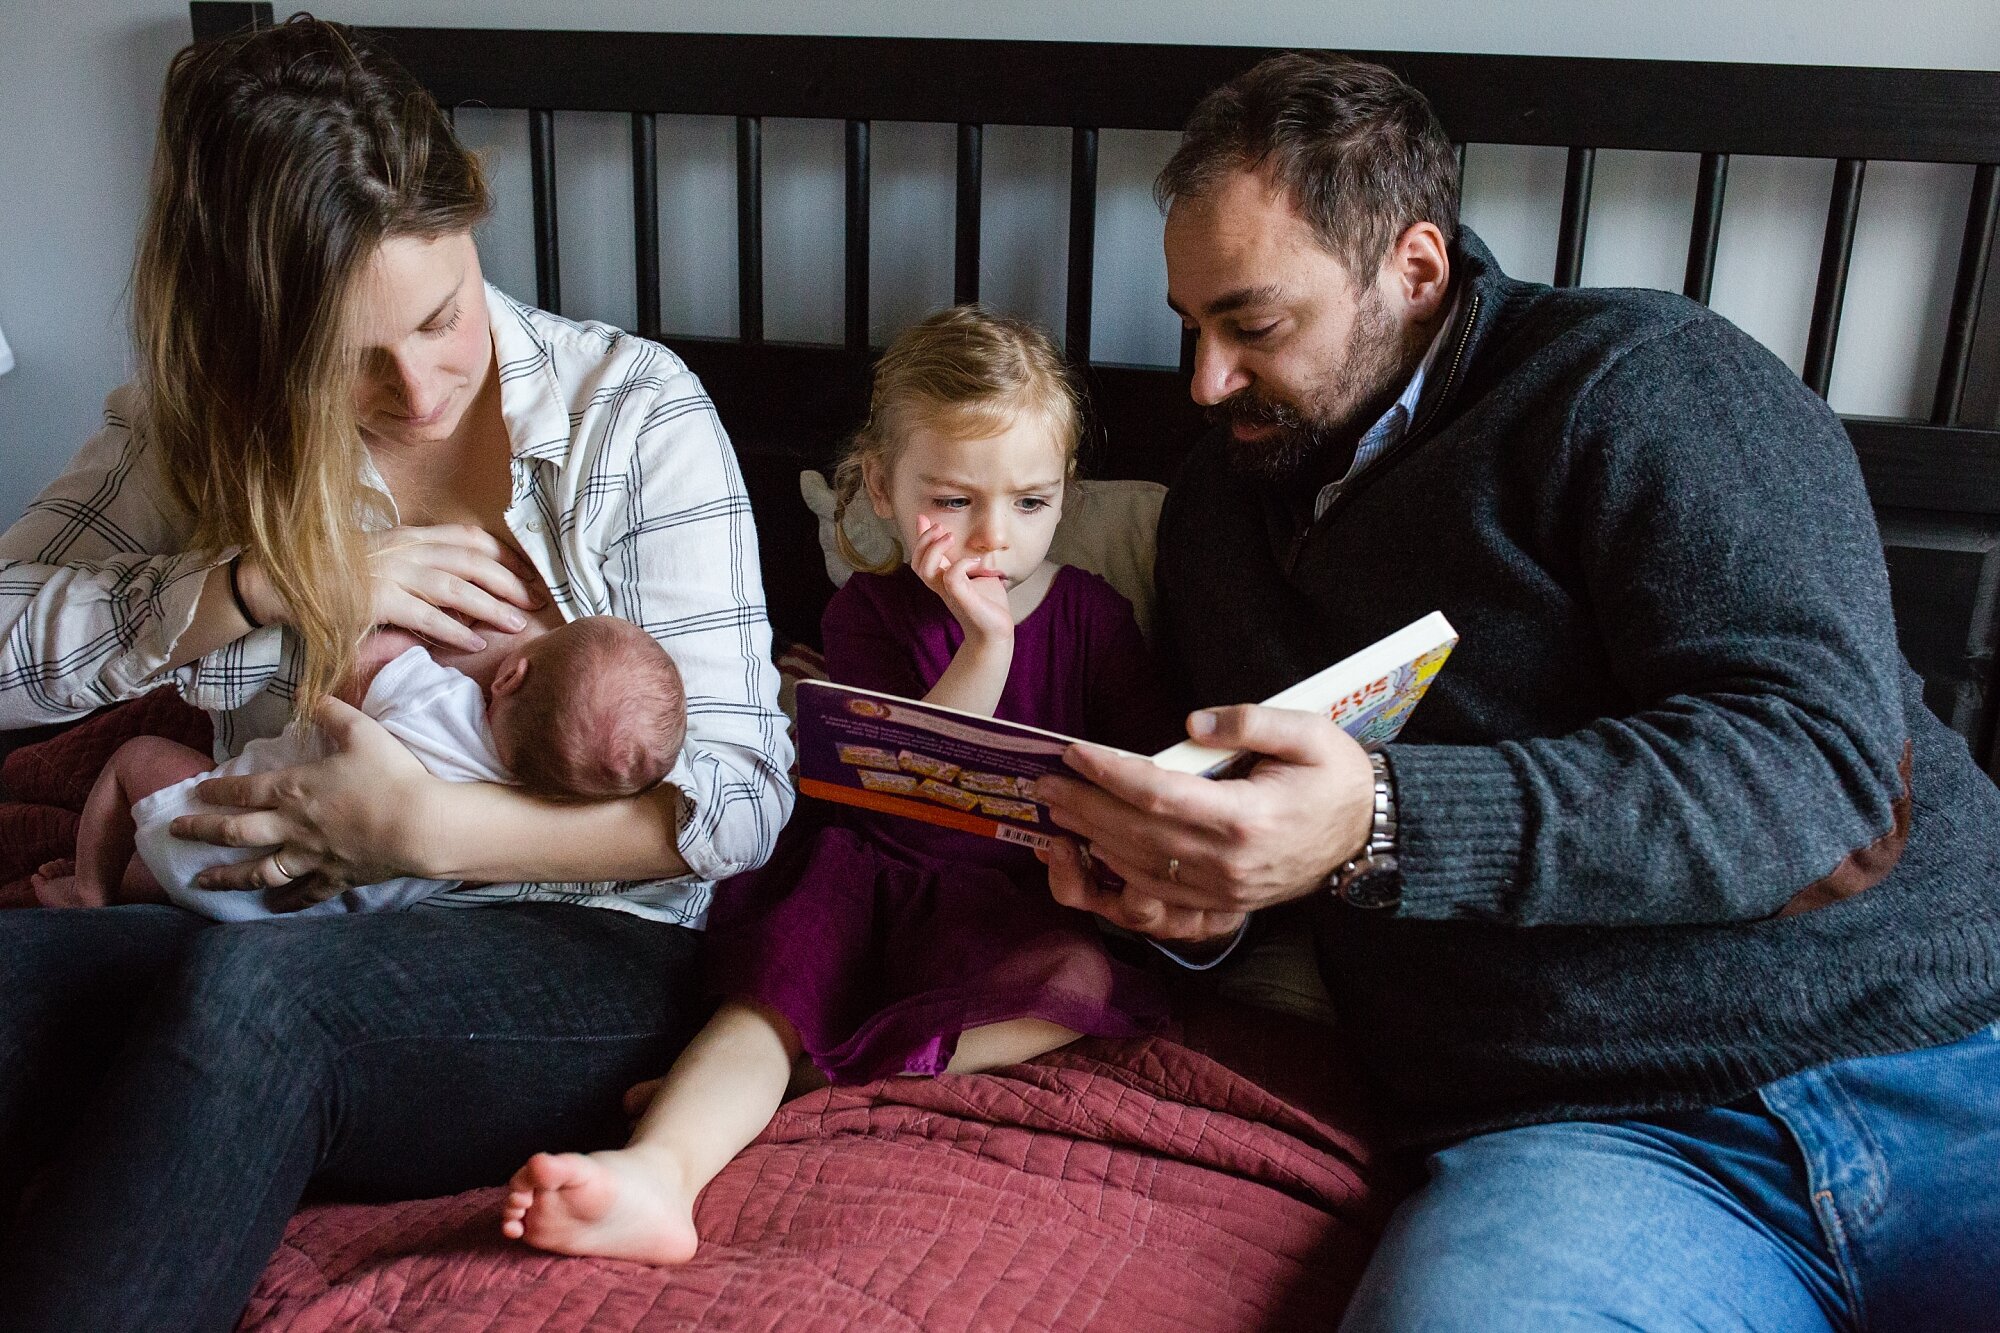 Big sister reads a book with dad while mom breastfeeds baby brother on the bed, Philadelphia family photographer